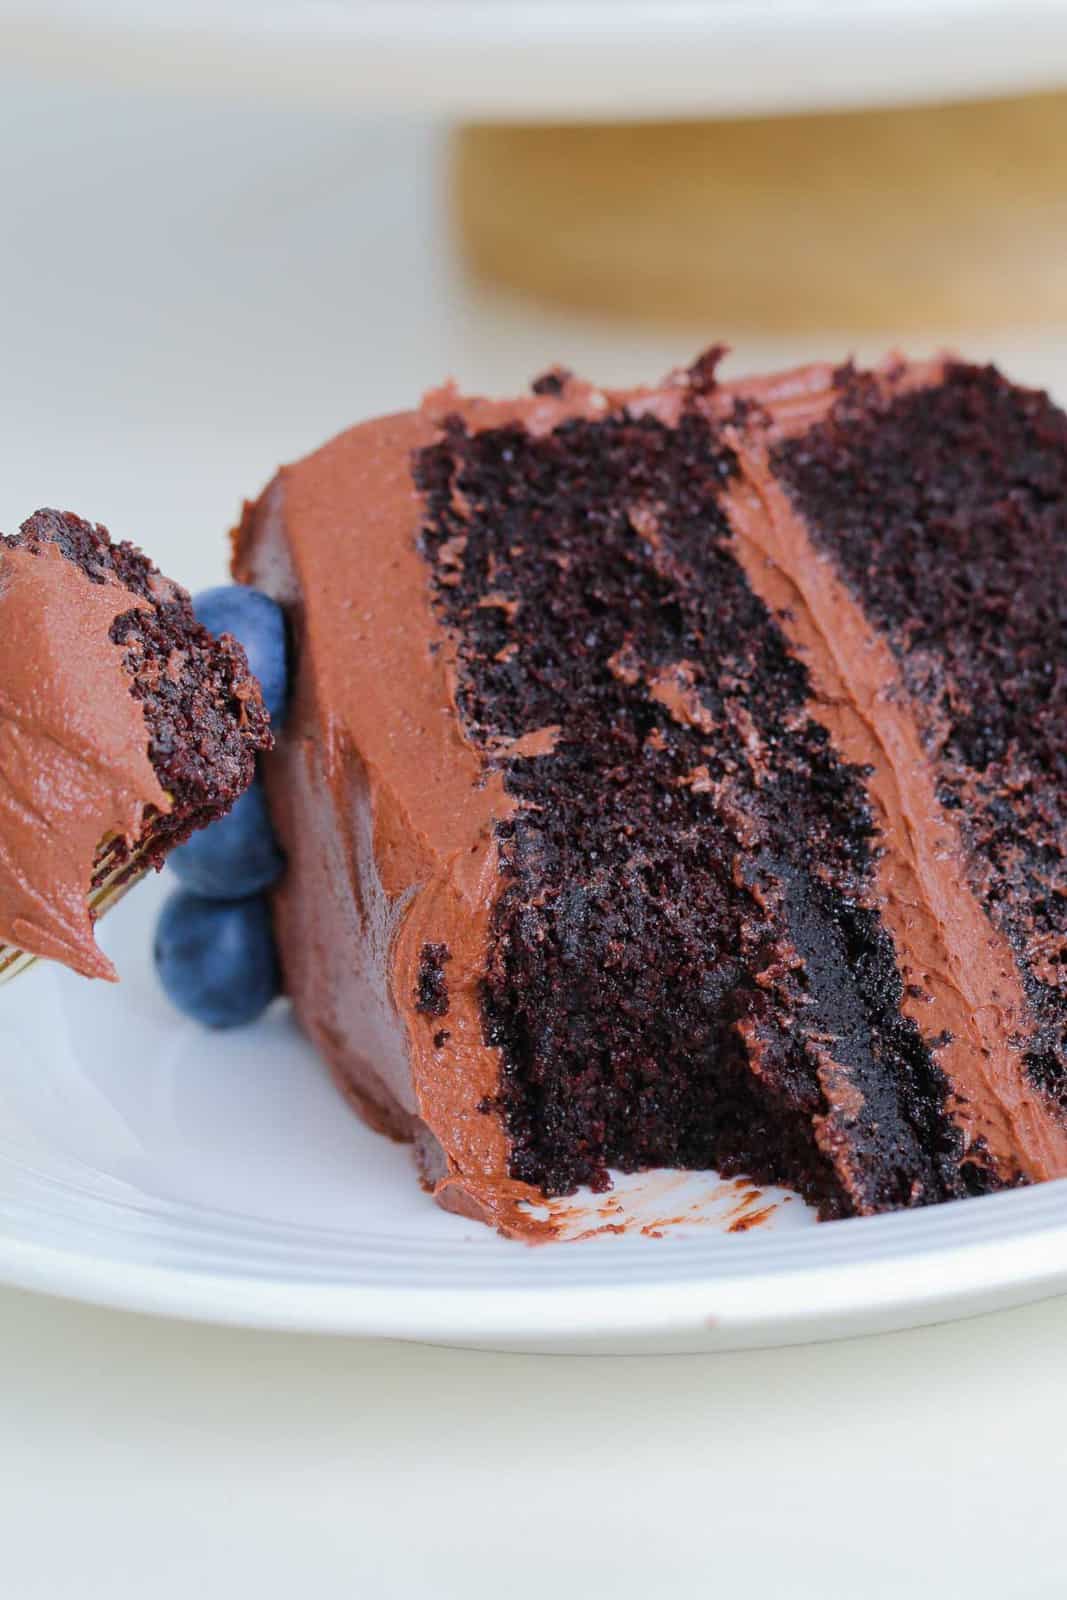 A half eaten piece of double layer chocolate mud cake on a plate with chocolate frosting and blueberries